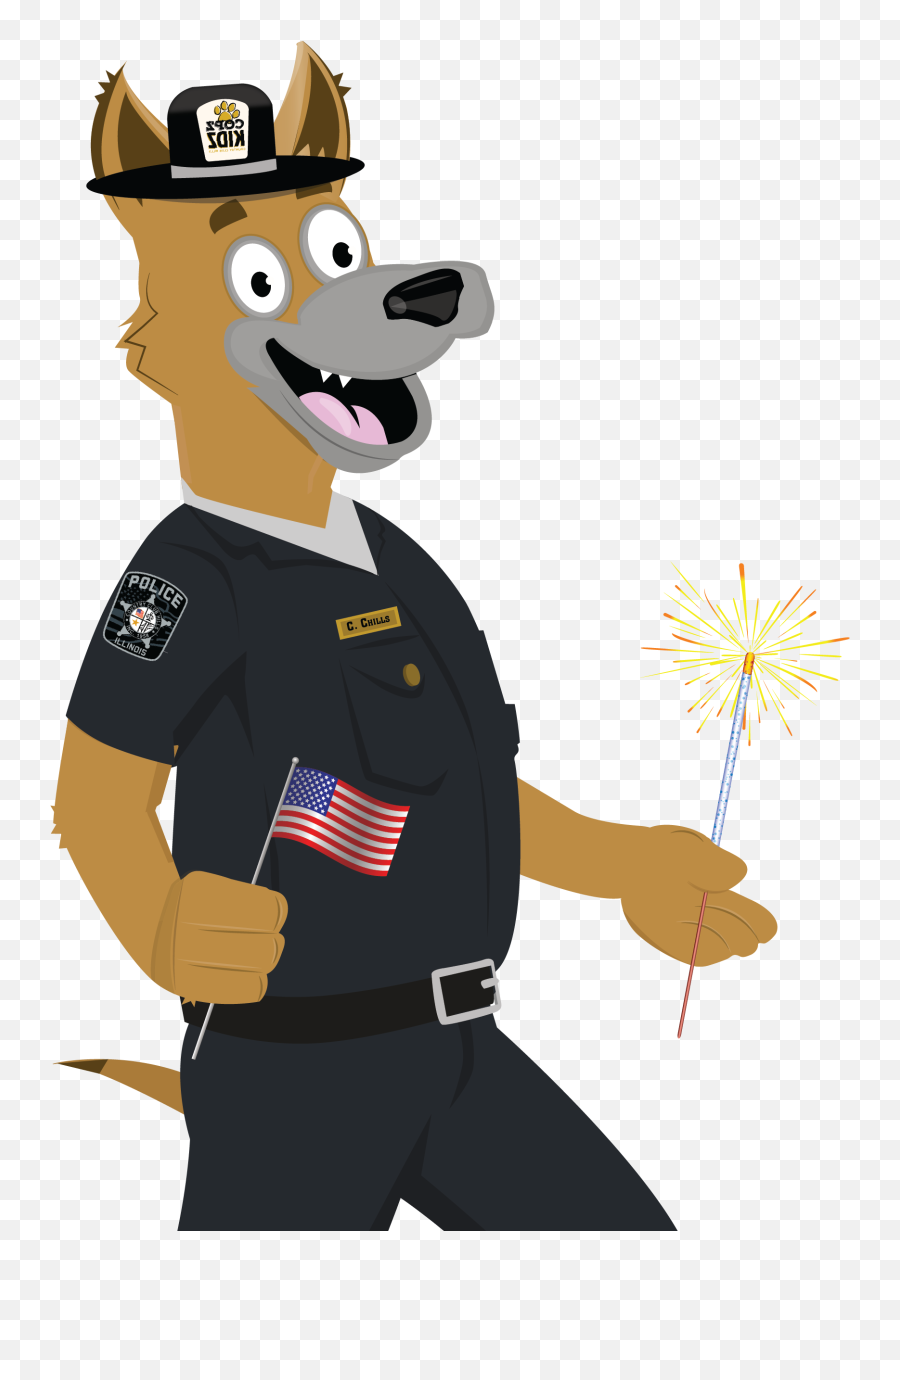 Happy 4th Of July Safety And Law Information Welcome To - Happy 4th Of July Police Emoji,Happy 4th Of July Clipart